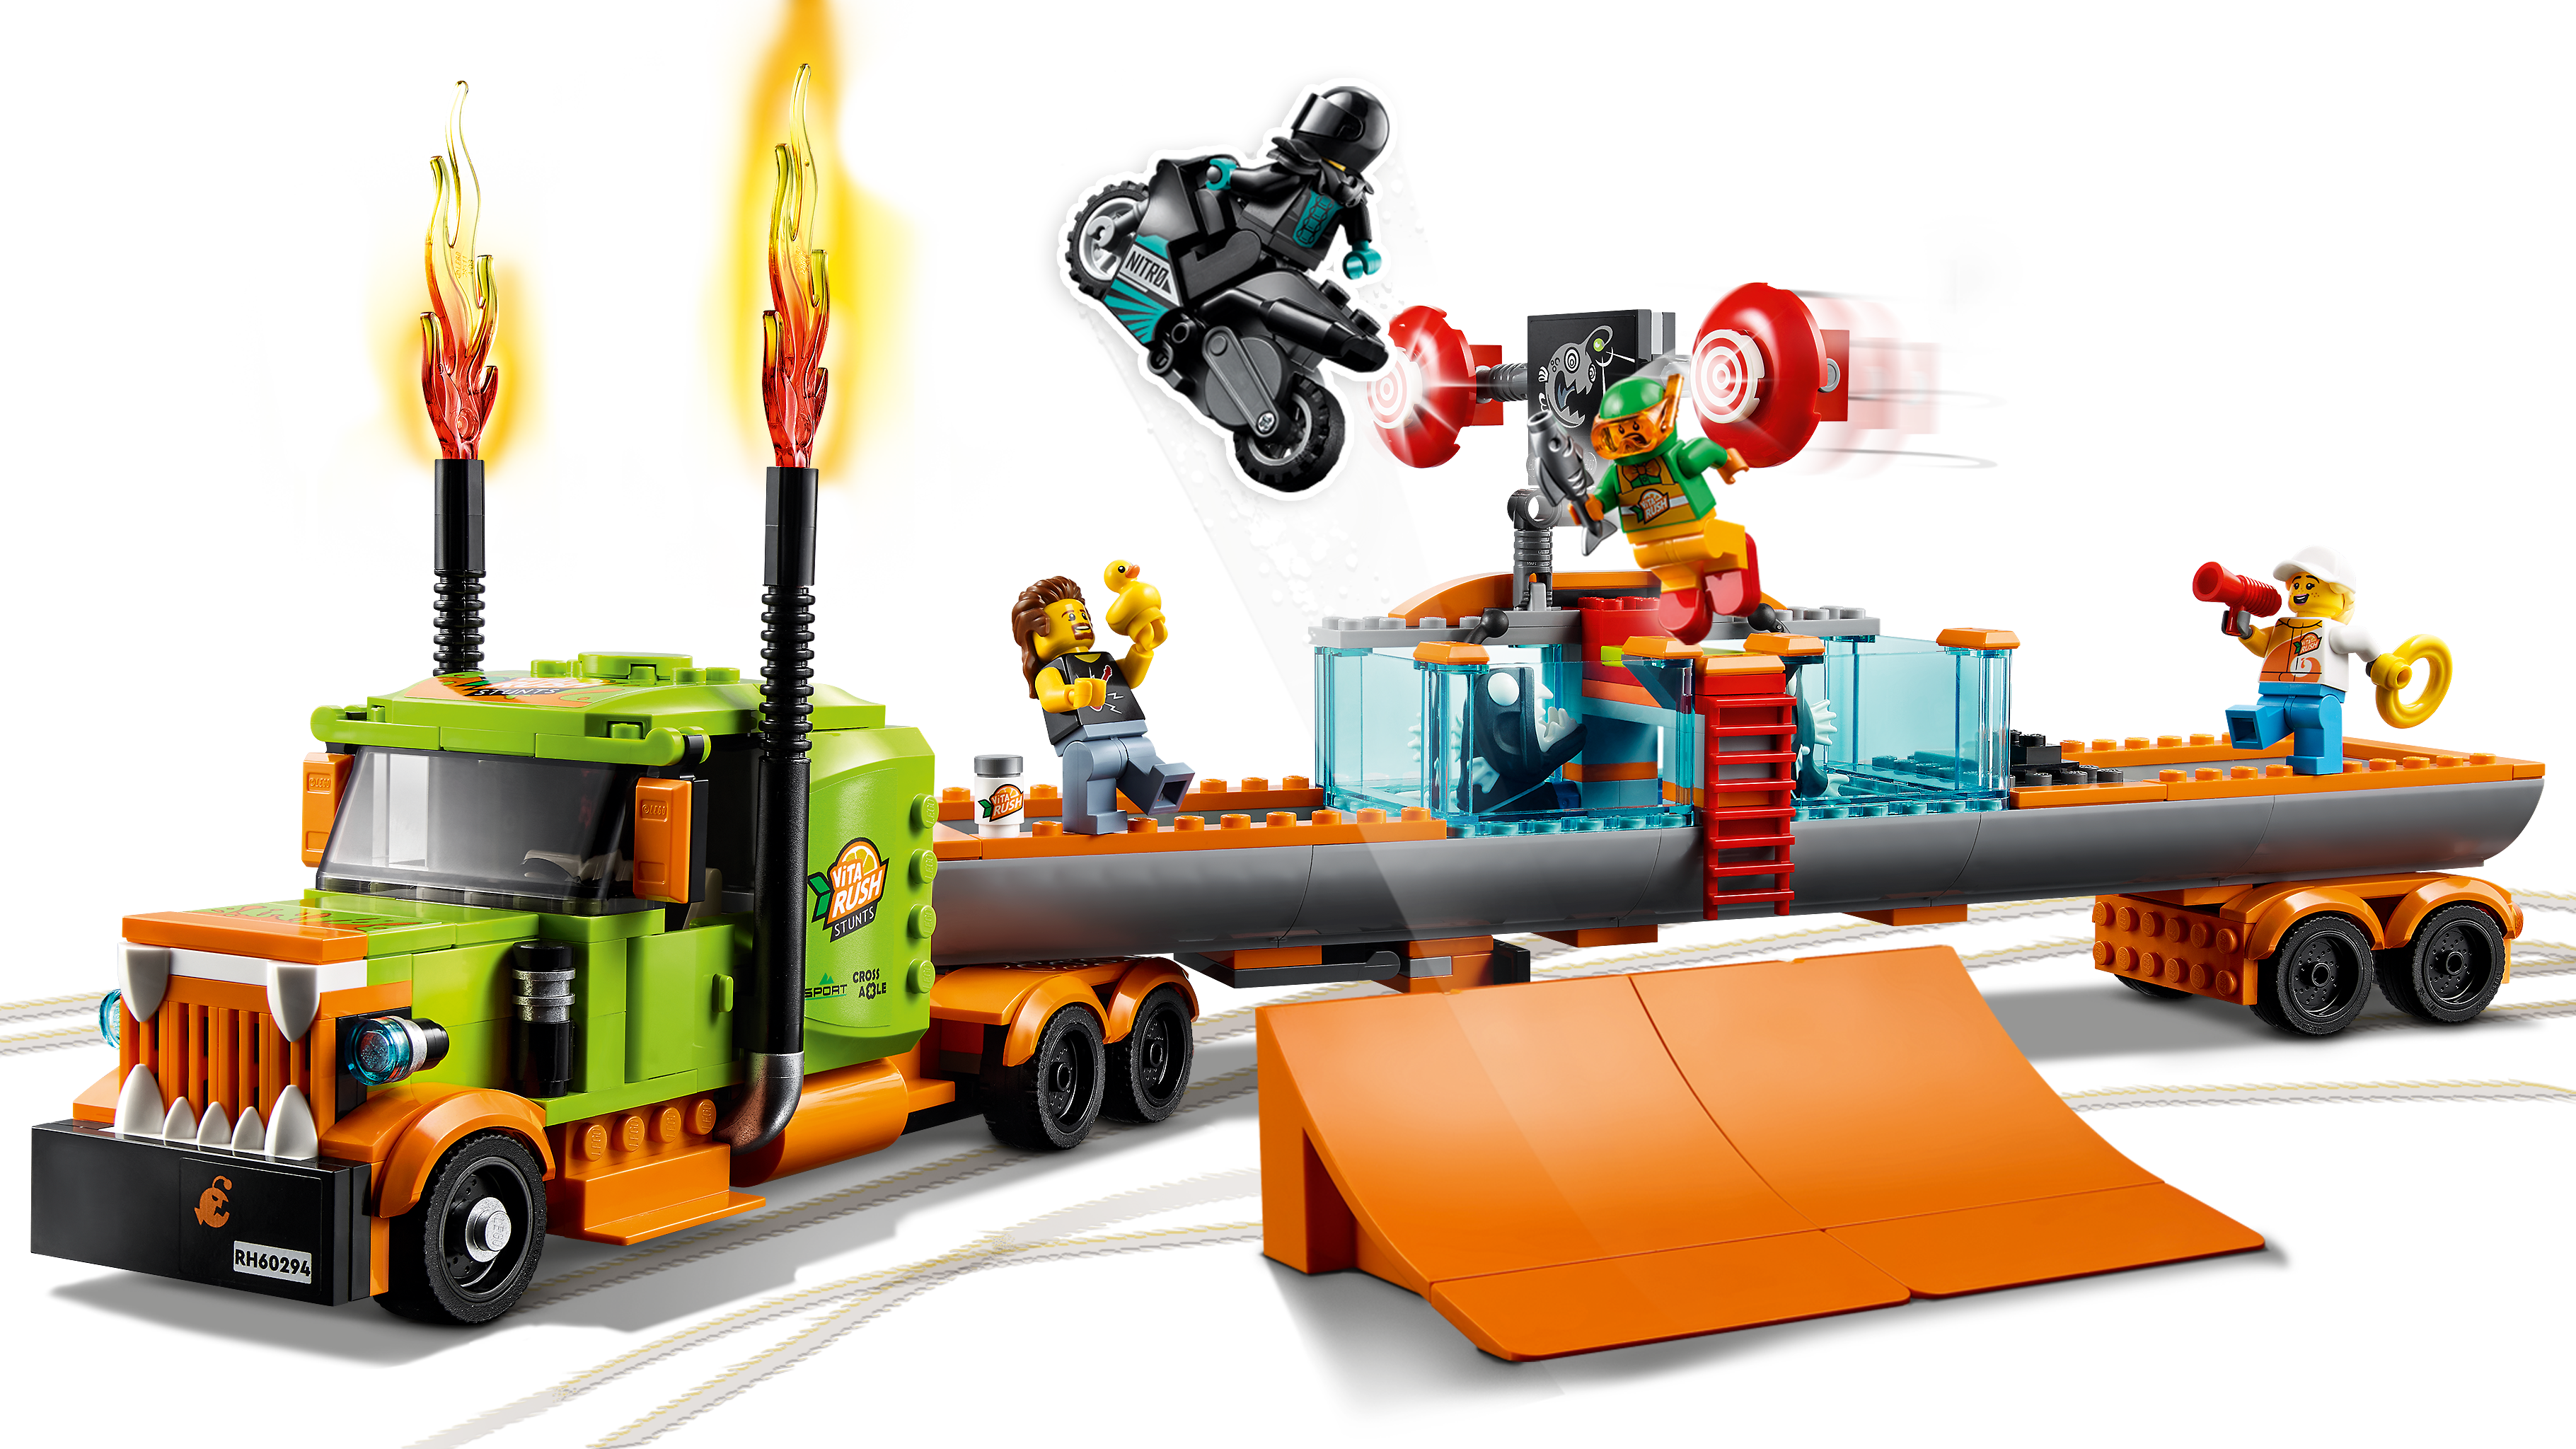 LEGO City Stunt Show Arena 60295 Building Toy Set with 2 Monster Trucks, 2  Collapsible Cars, a Flywheel-Powered Stunt Bike, Launch Ramps, Ring of fire